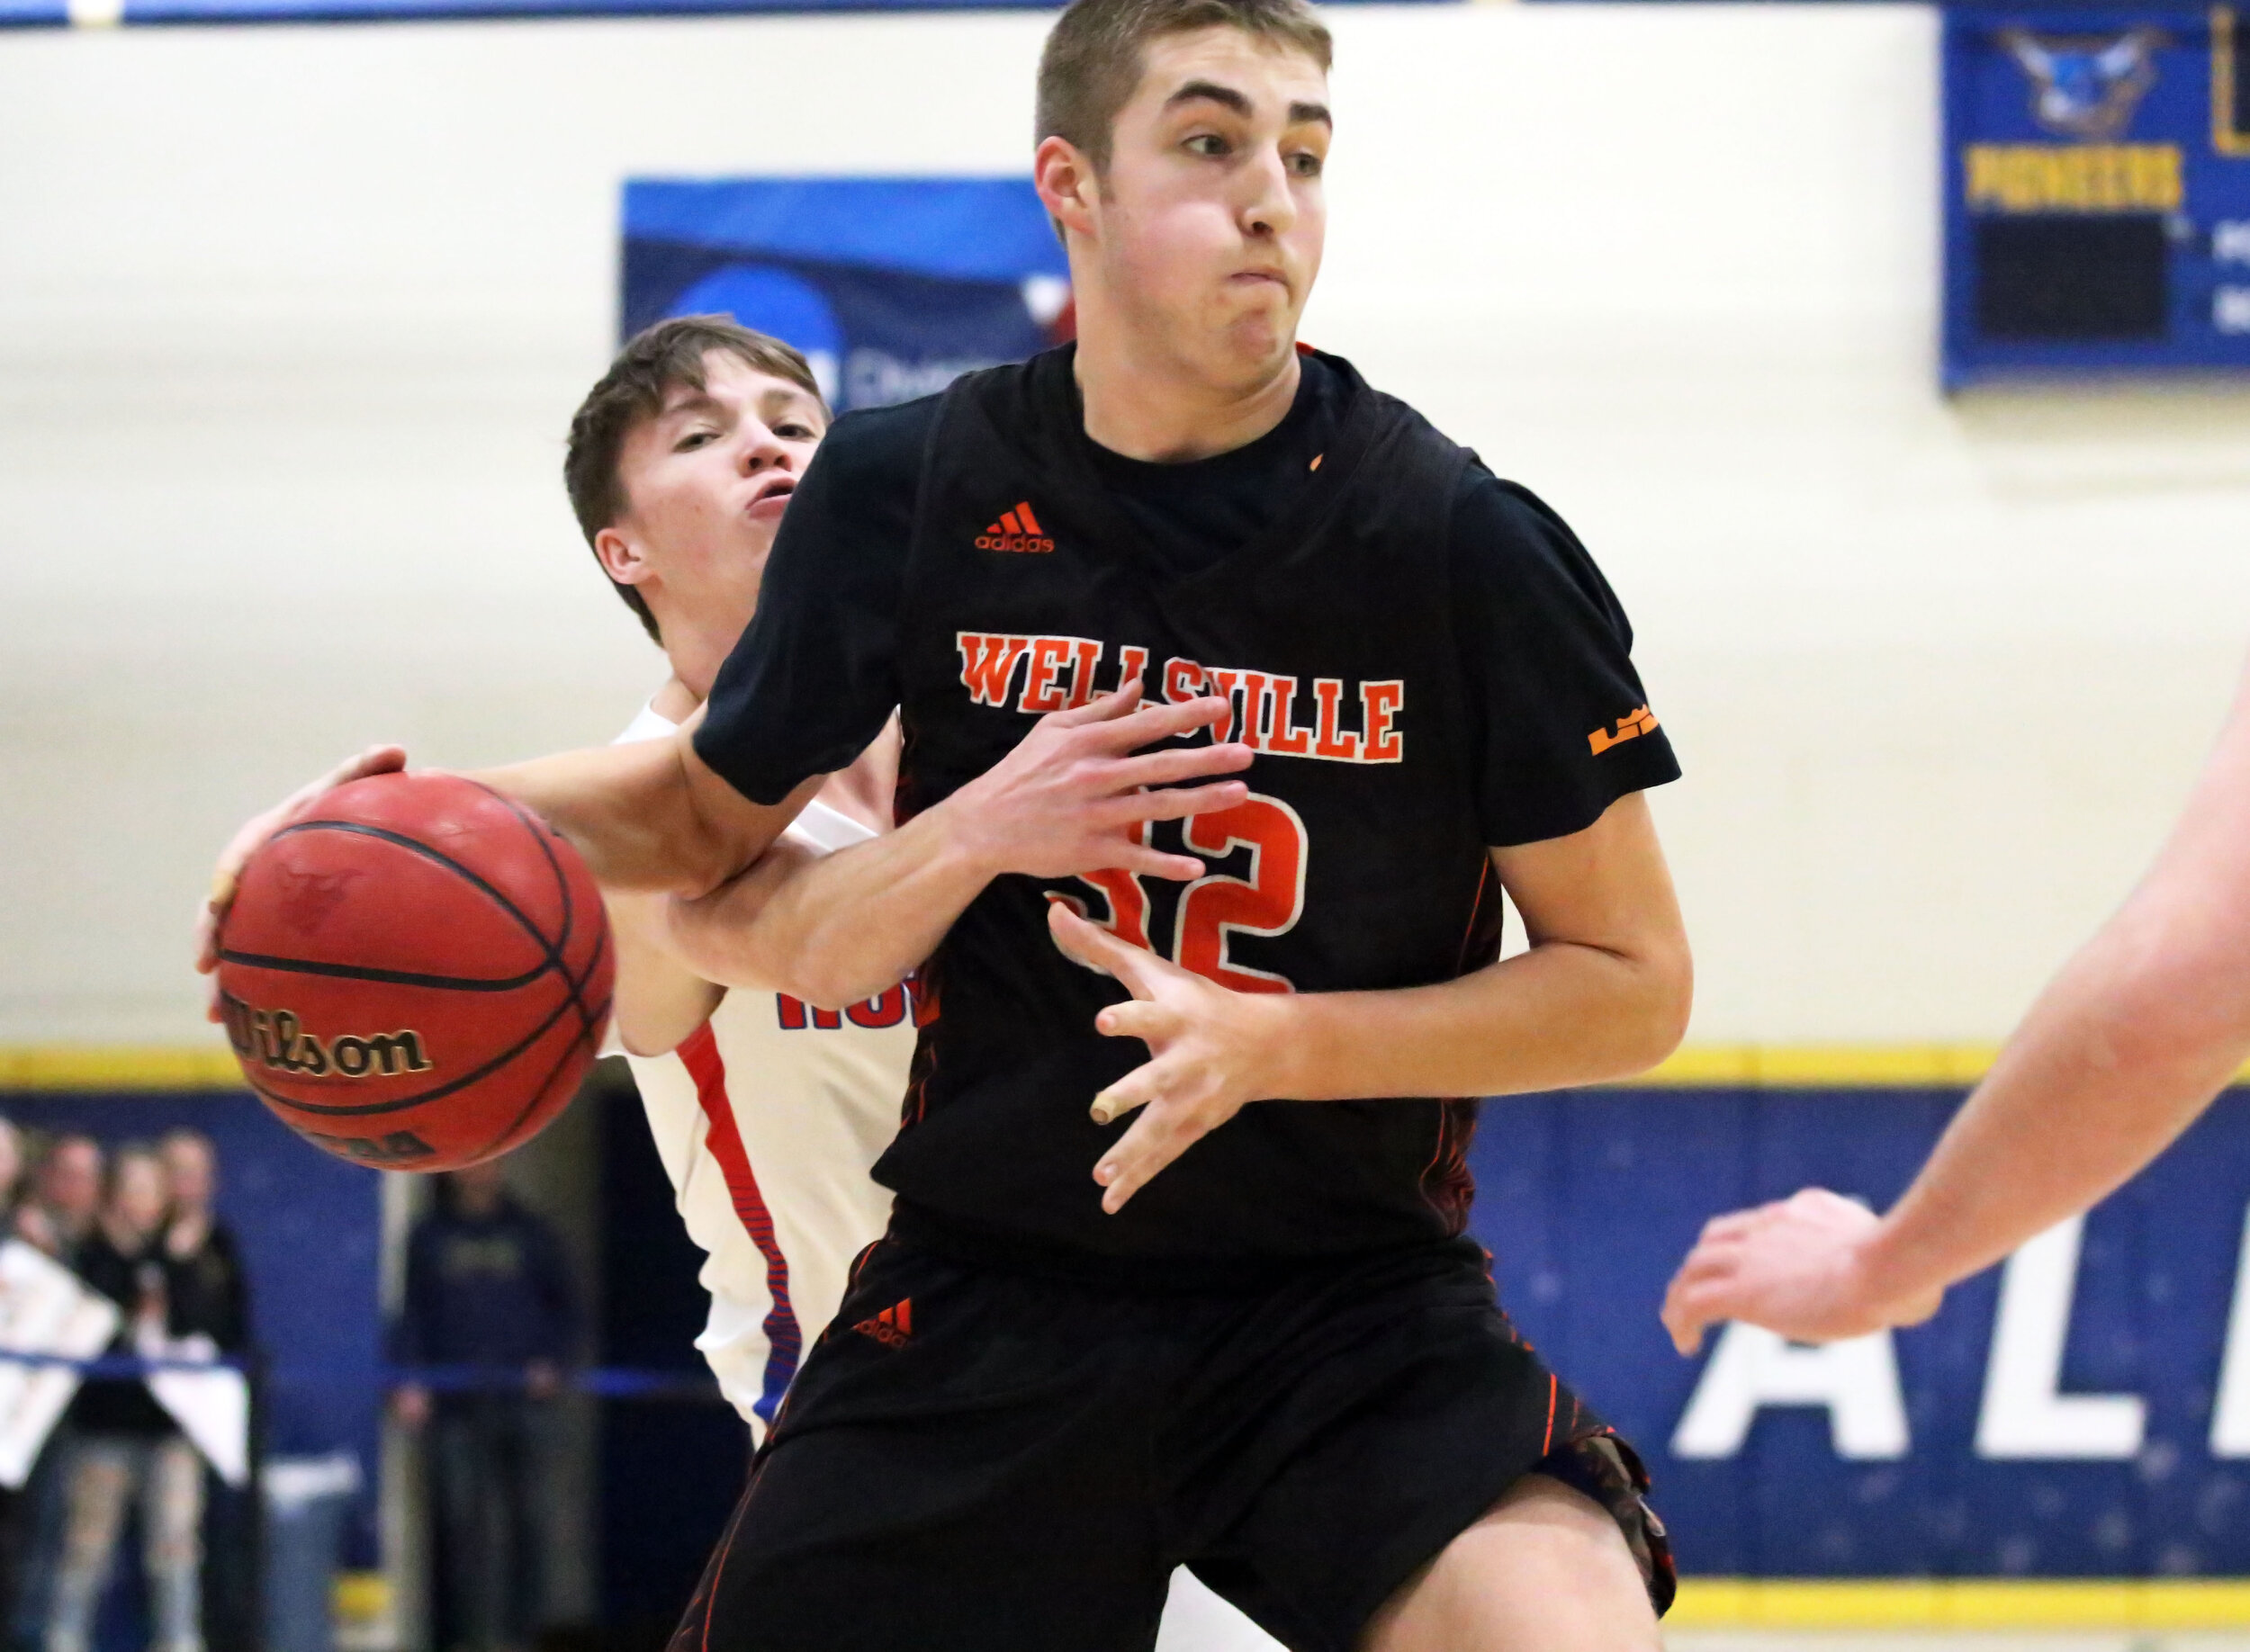  Wellsville junior Aidan Hart, middle, works his way past the Hornell defense on his way to the basket during Friday night’s clash with Hornell at the Barkley Showcase at Alfred State College. [Chris Brooks/WellsvilleSports.com] 